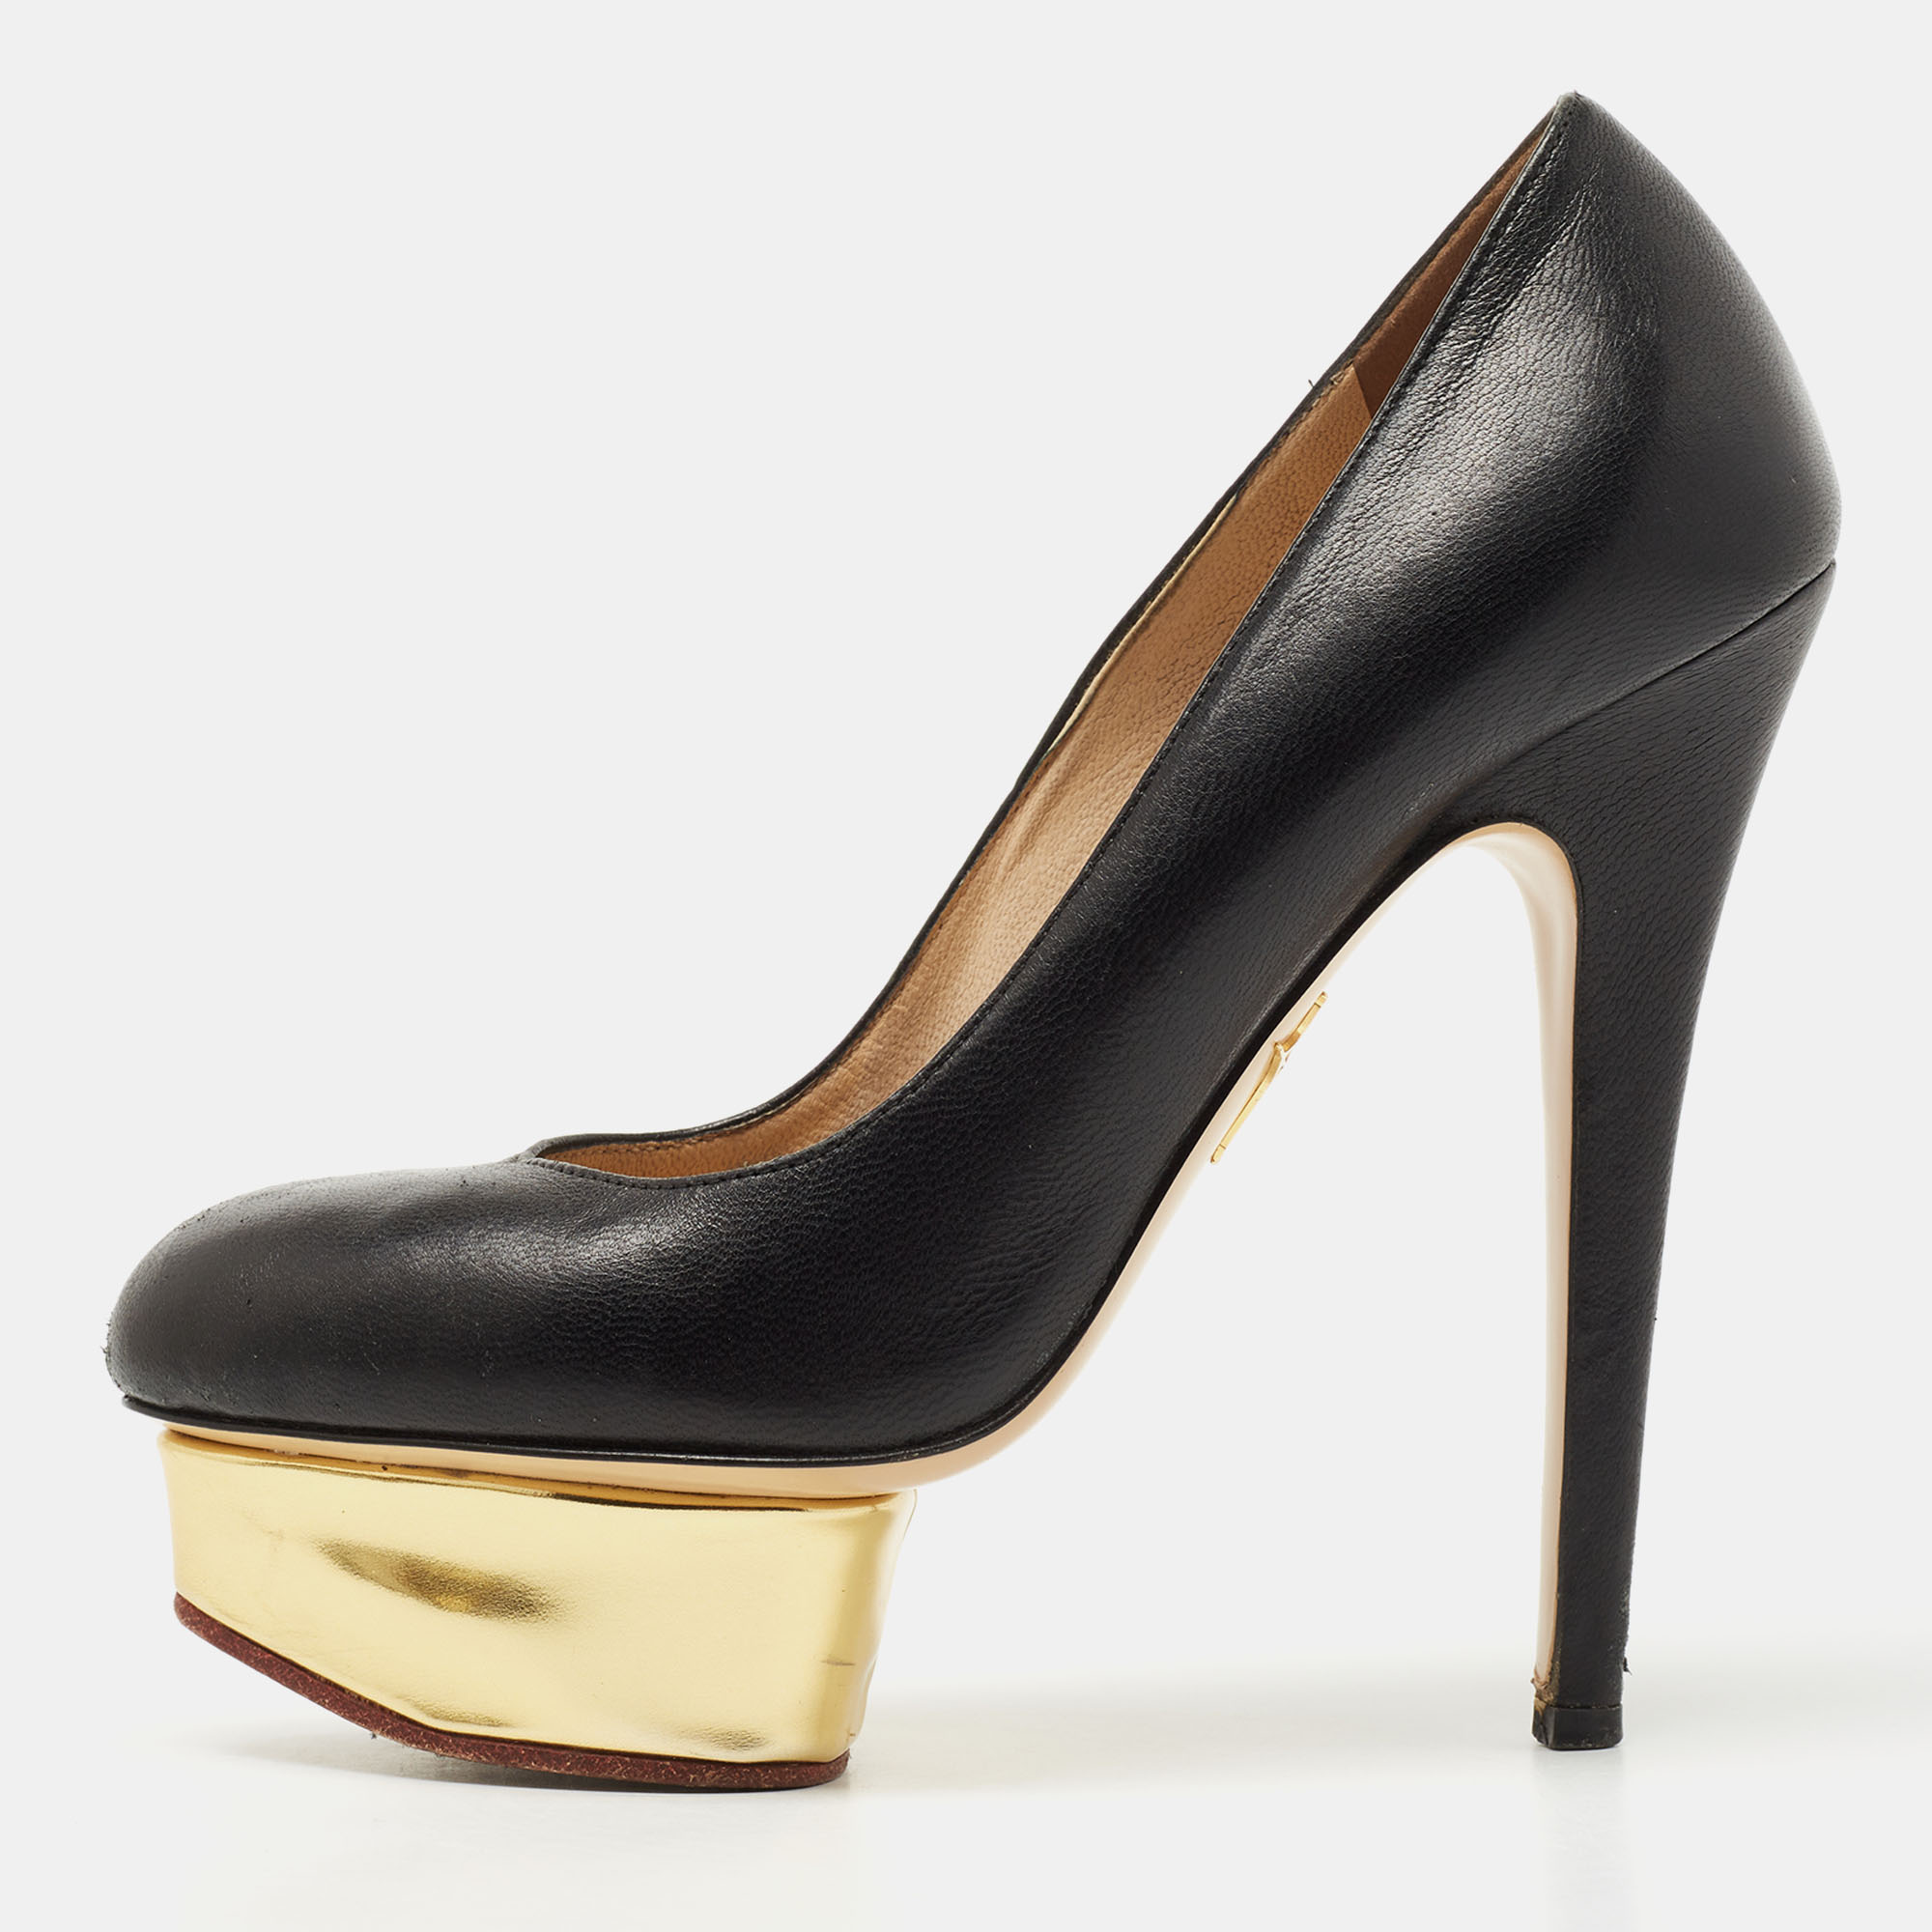 Pre-owned Charlotte Olympia Black Leather Dolly Platform Pumps Size 36.5